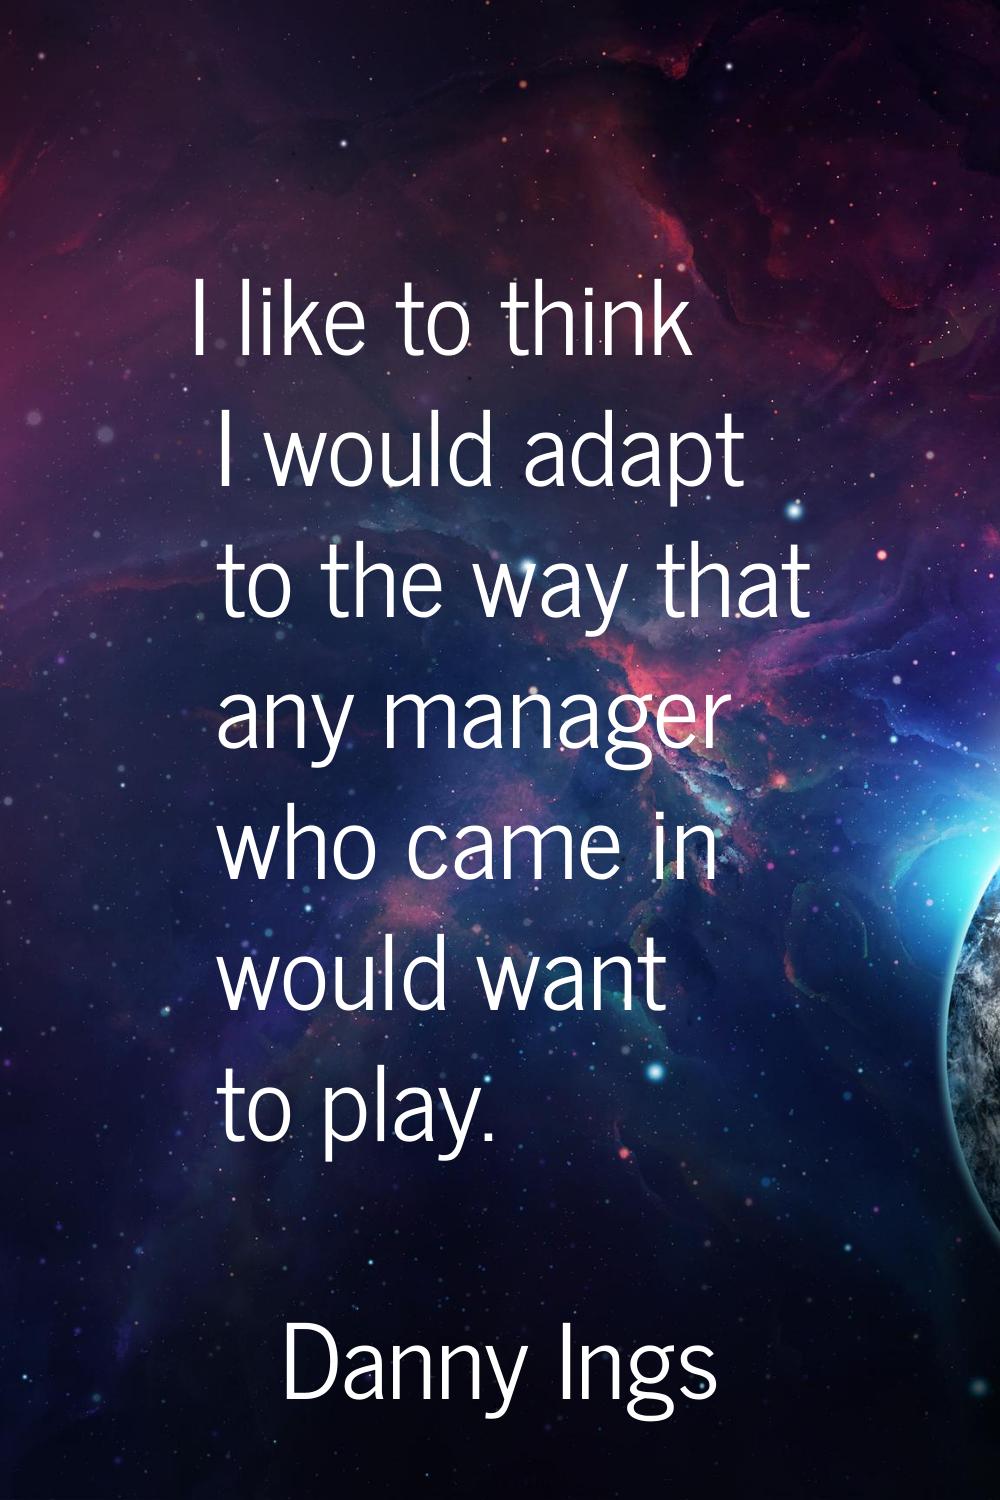 I like to think I would adapt to the way that any manager who came in would want to play.